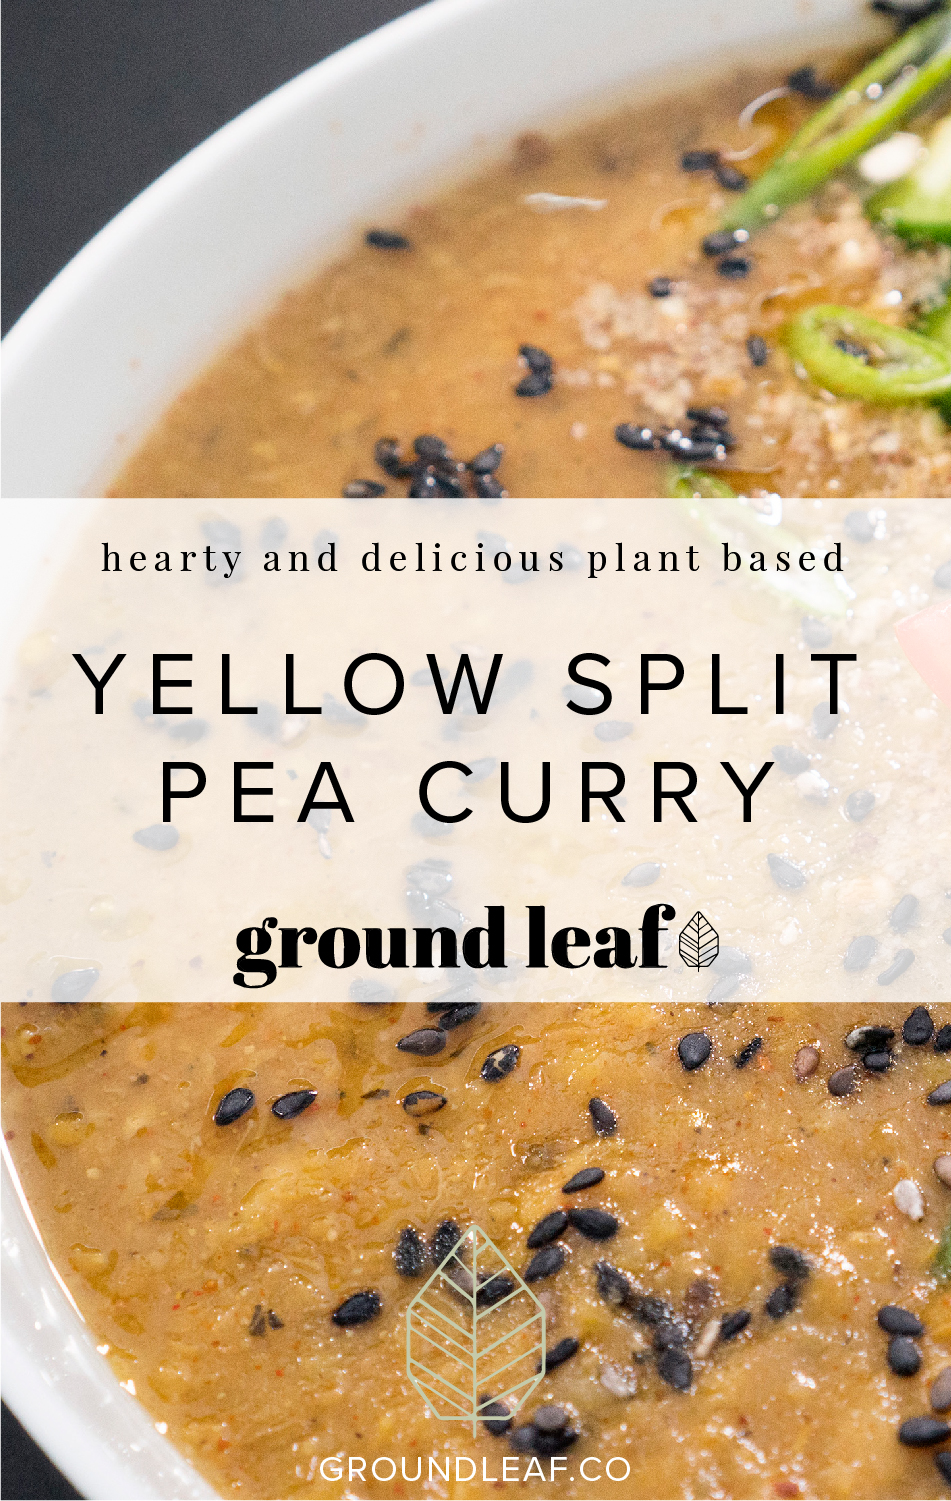 This recipe has legumes and grains together for a filling meal. We particularly love this as a warm, savory breakfast option. Throw everything in the pressure cooker when you wake up and have breakfast ready before you walk out the door. 